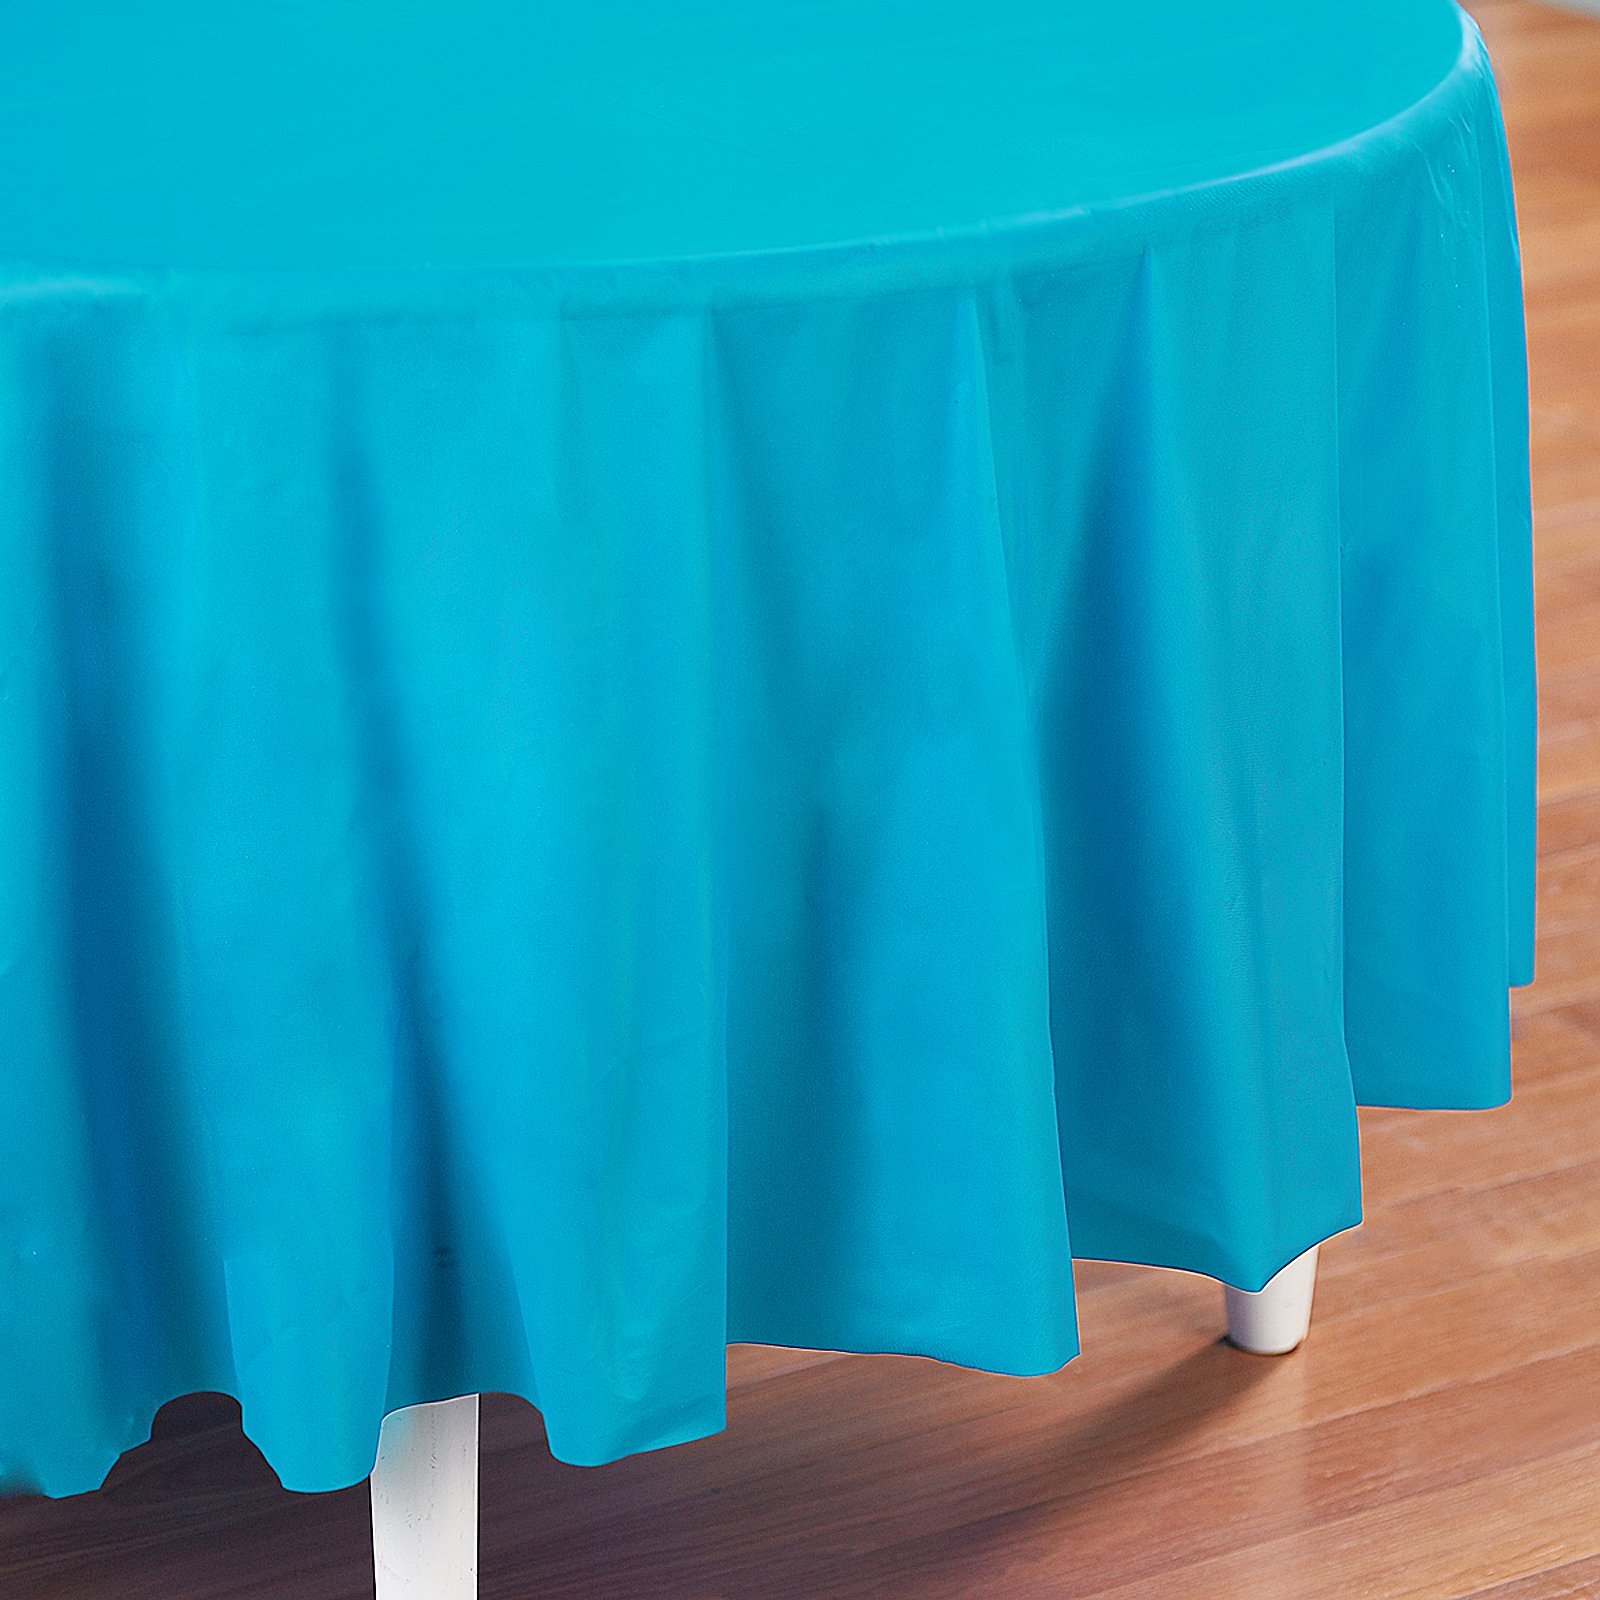 Bermuda Blue (Turquoise) Round Plastic Tablecover